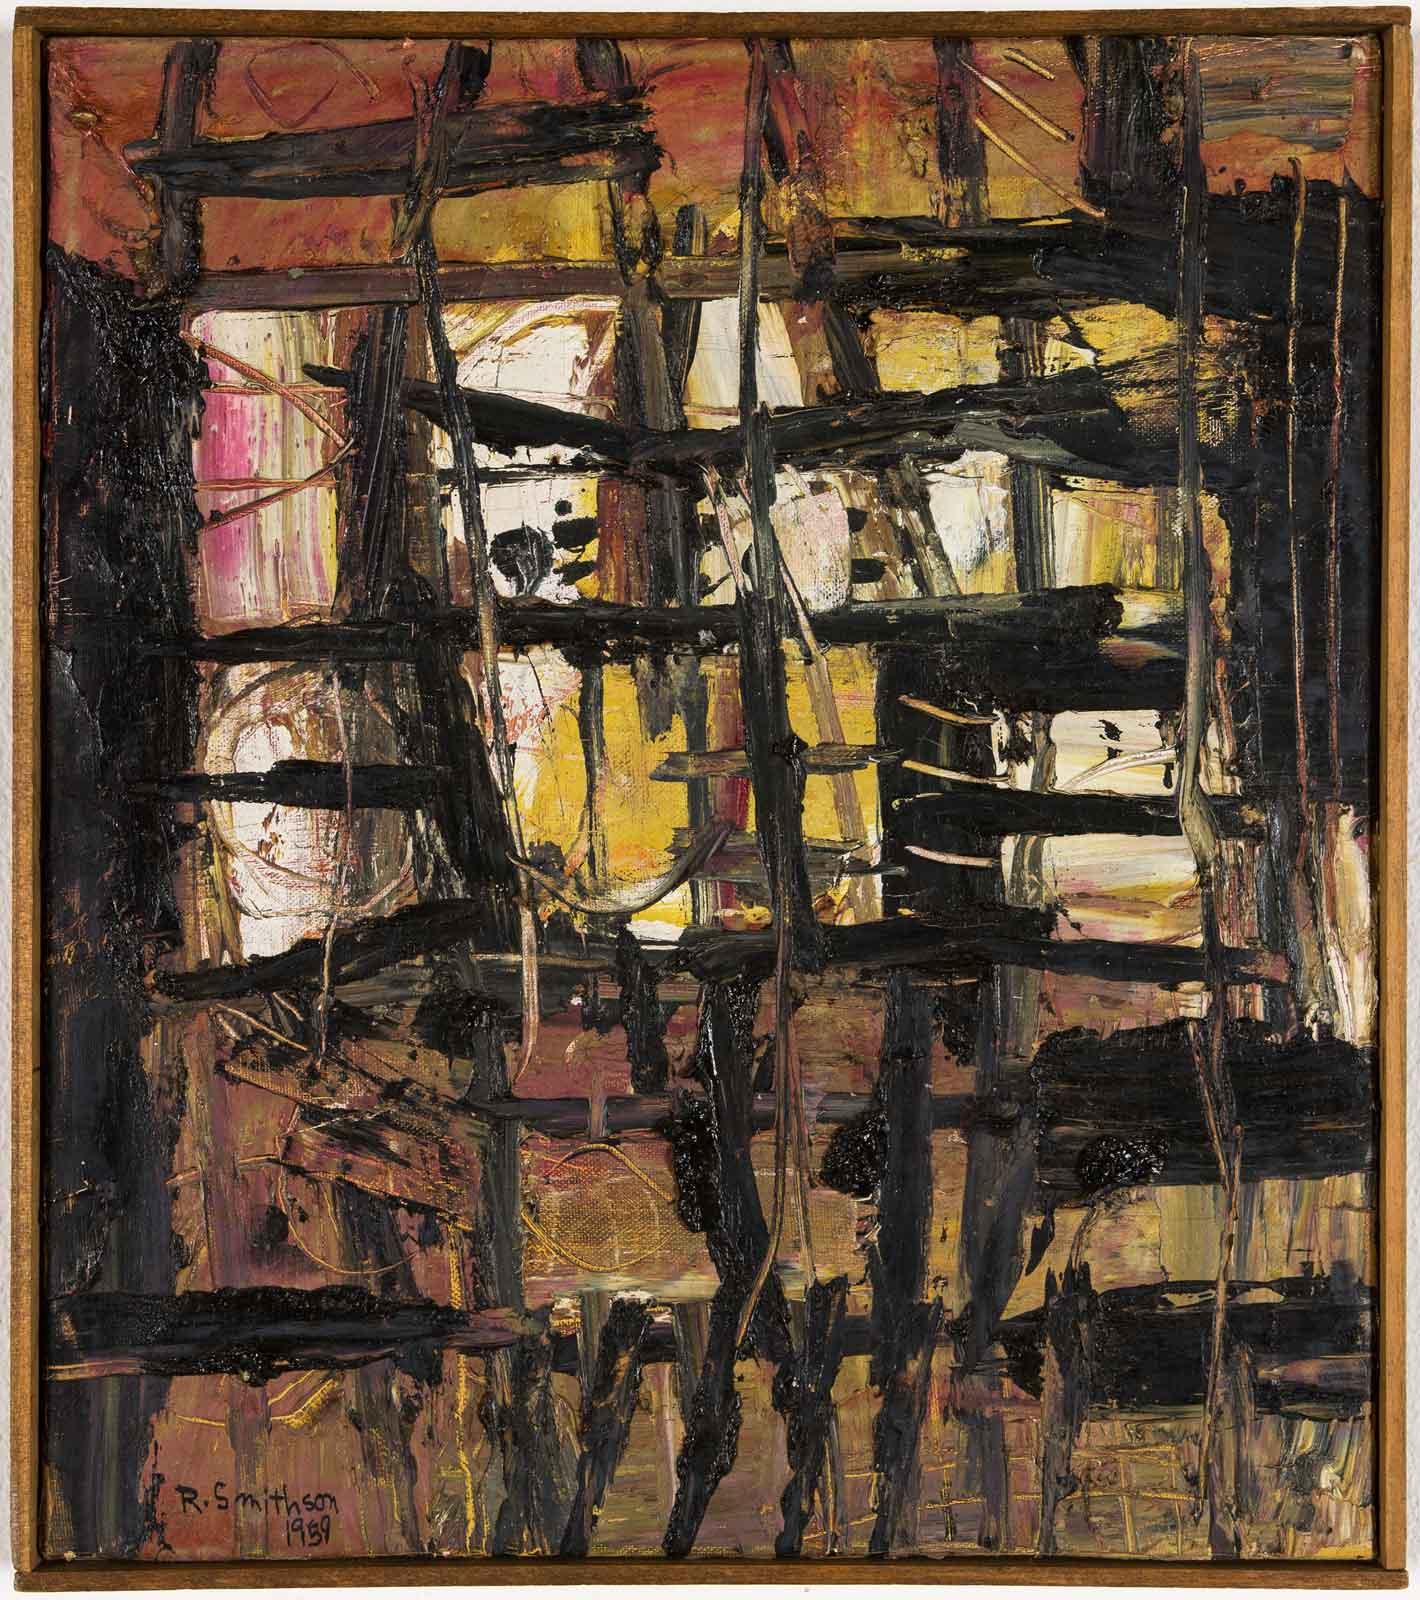 A 1959 abstract painting in dark earth tones by Robert Smithson. Painted lines intersect each other in a loose perpendicular manner.